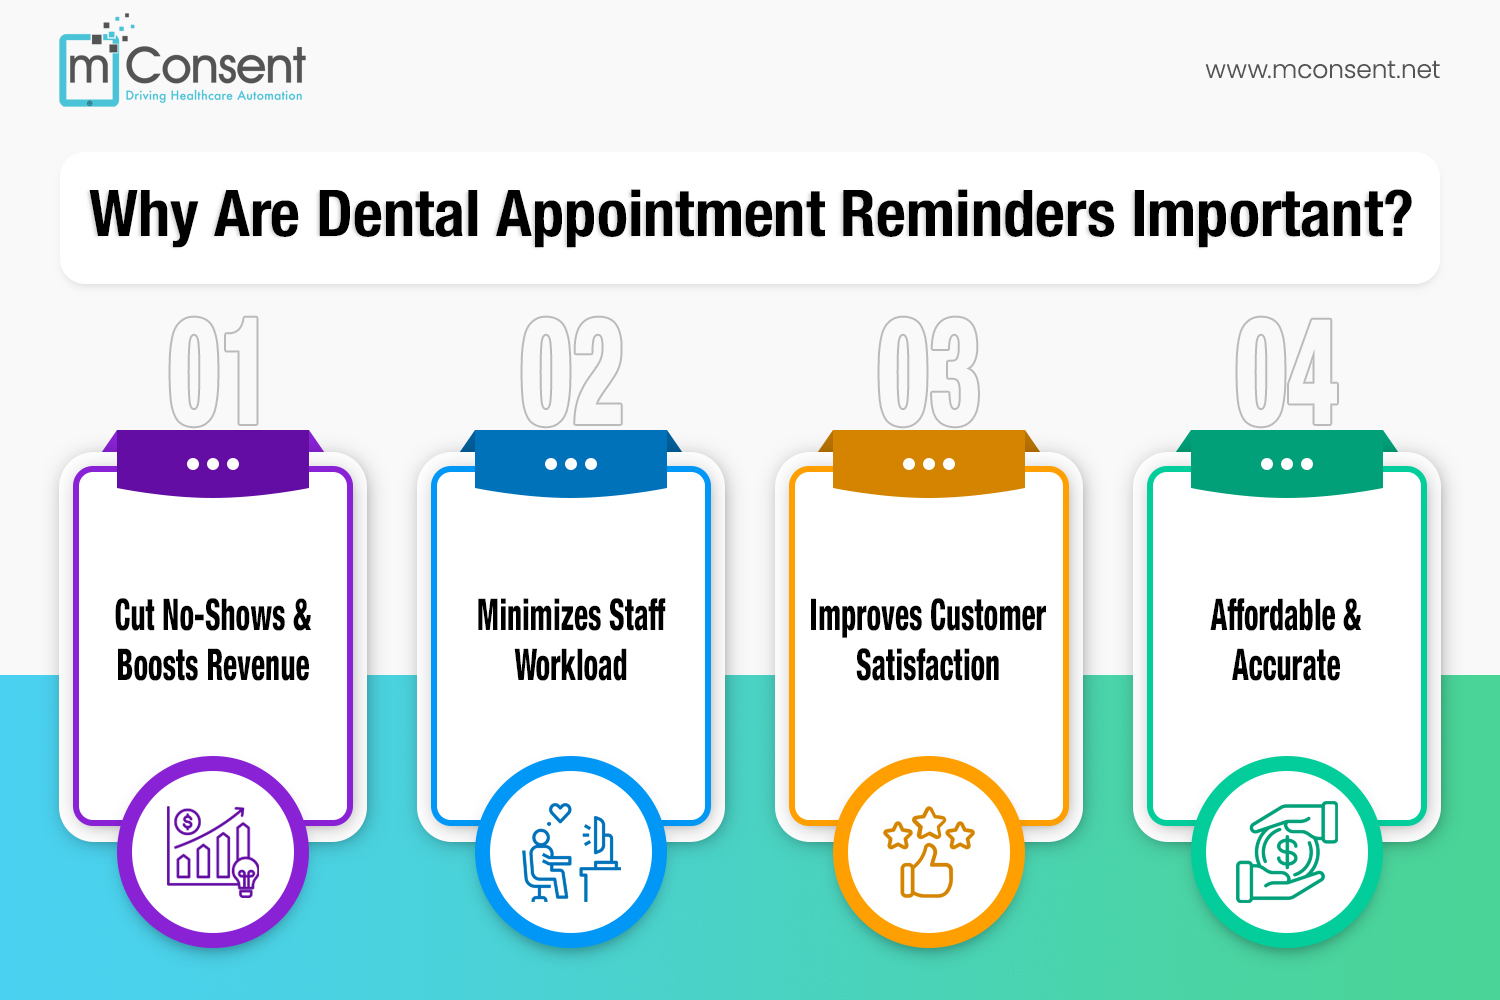 Why Are Dental Appointment Reminders Important?